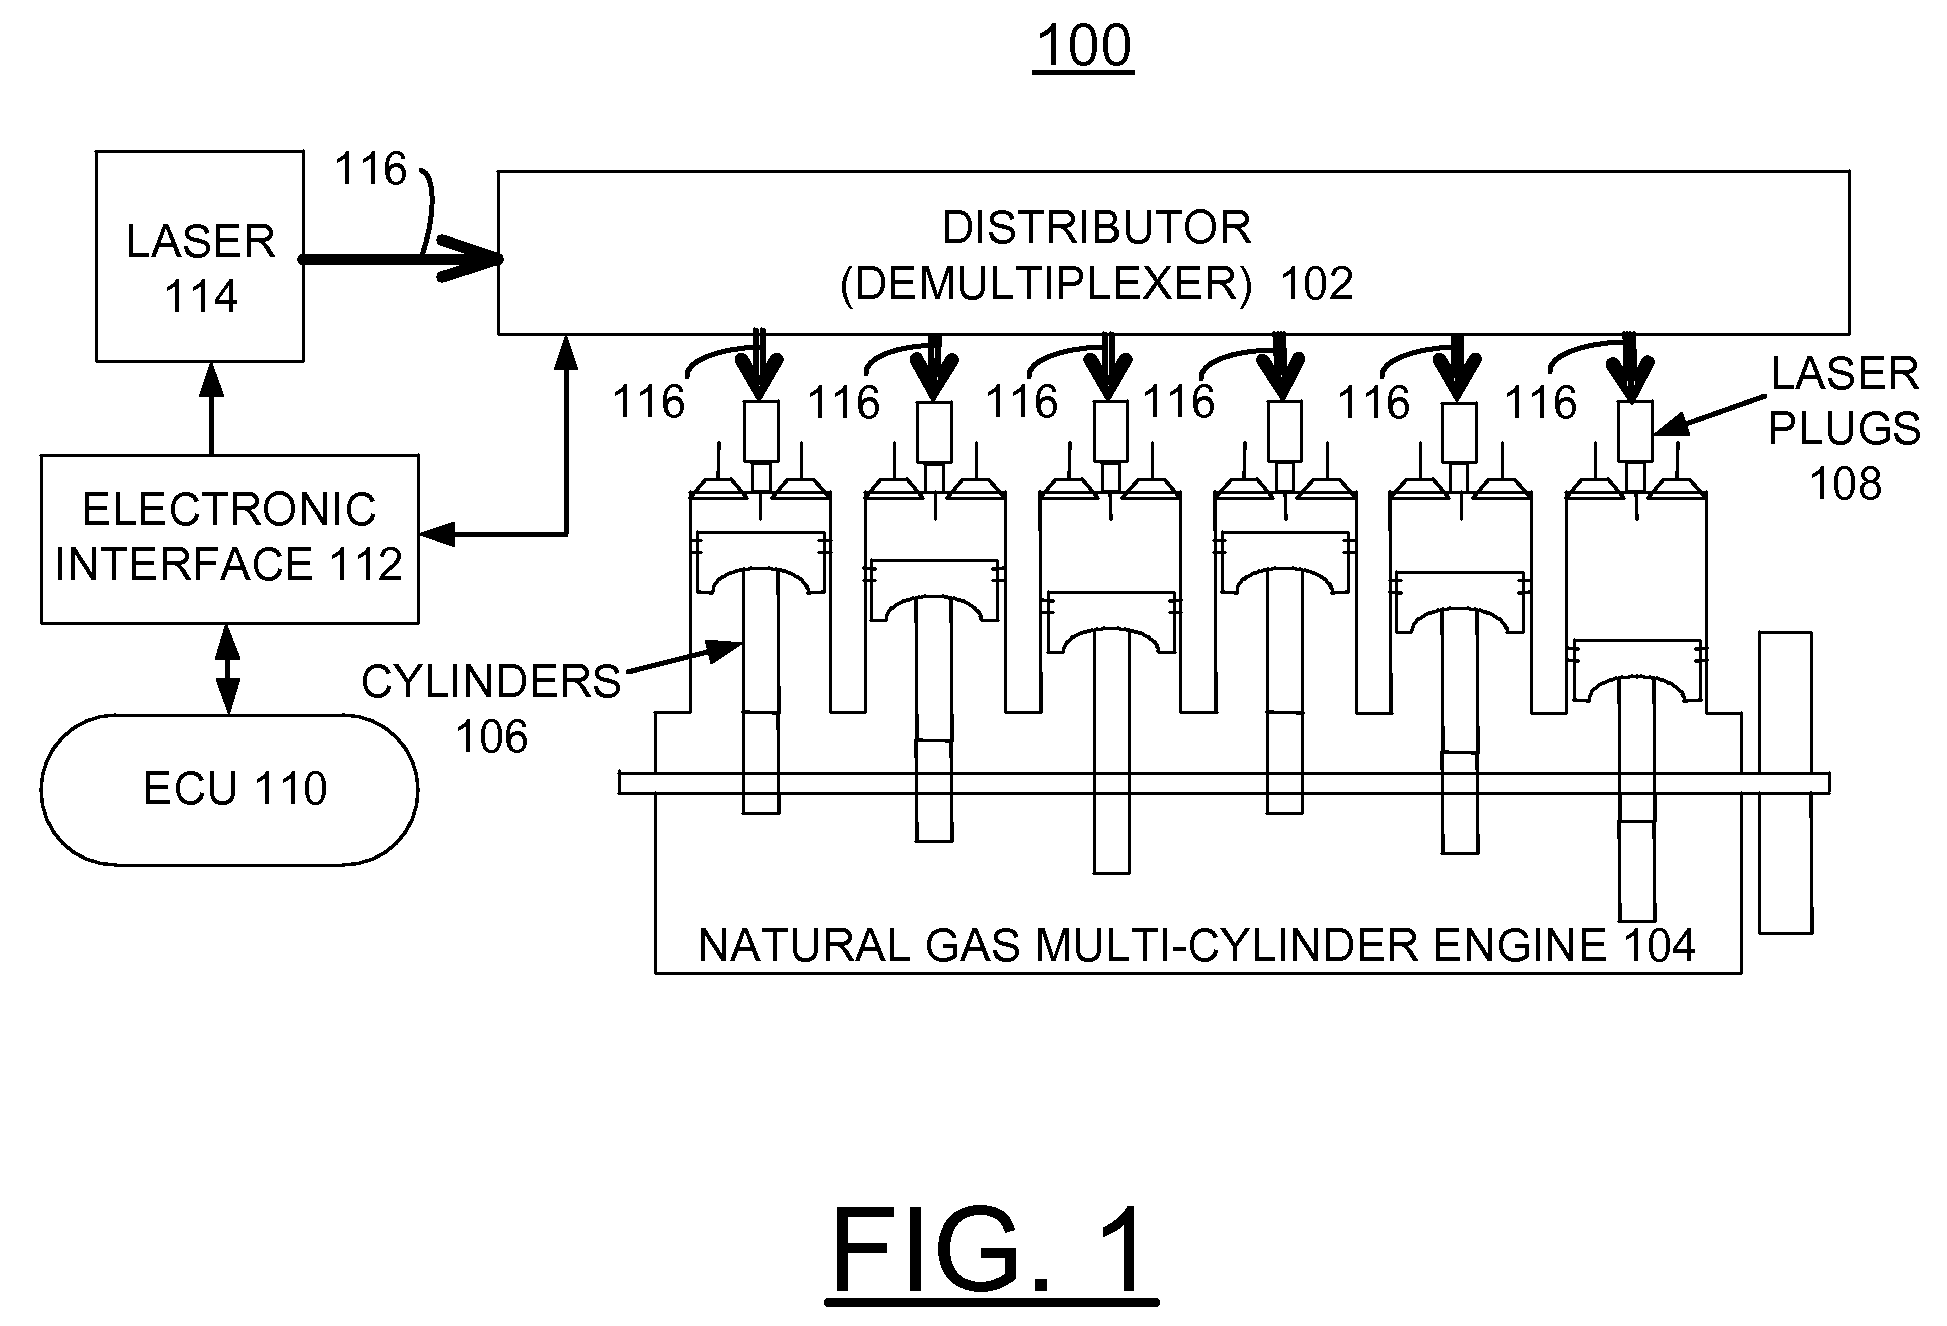 Method and system to distribute high-energy pulses to multiple channels